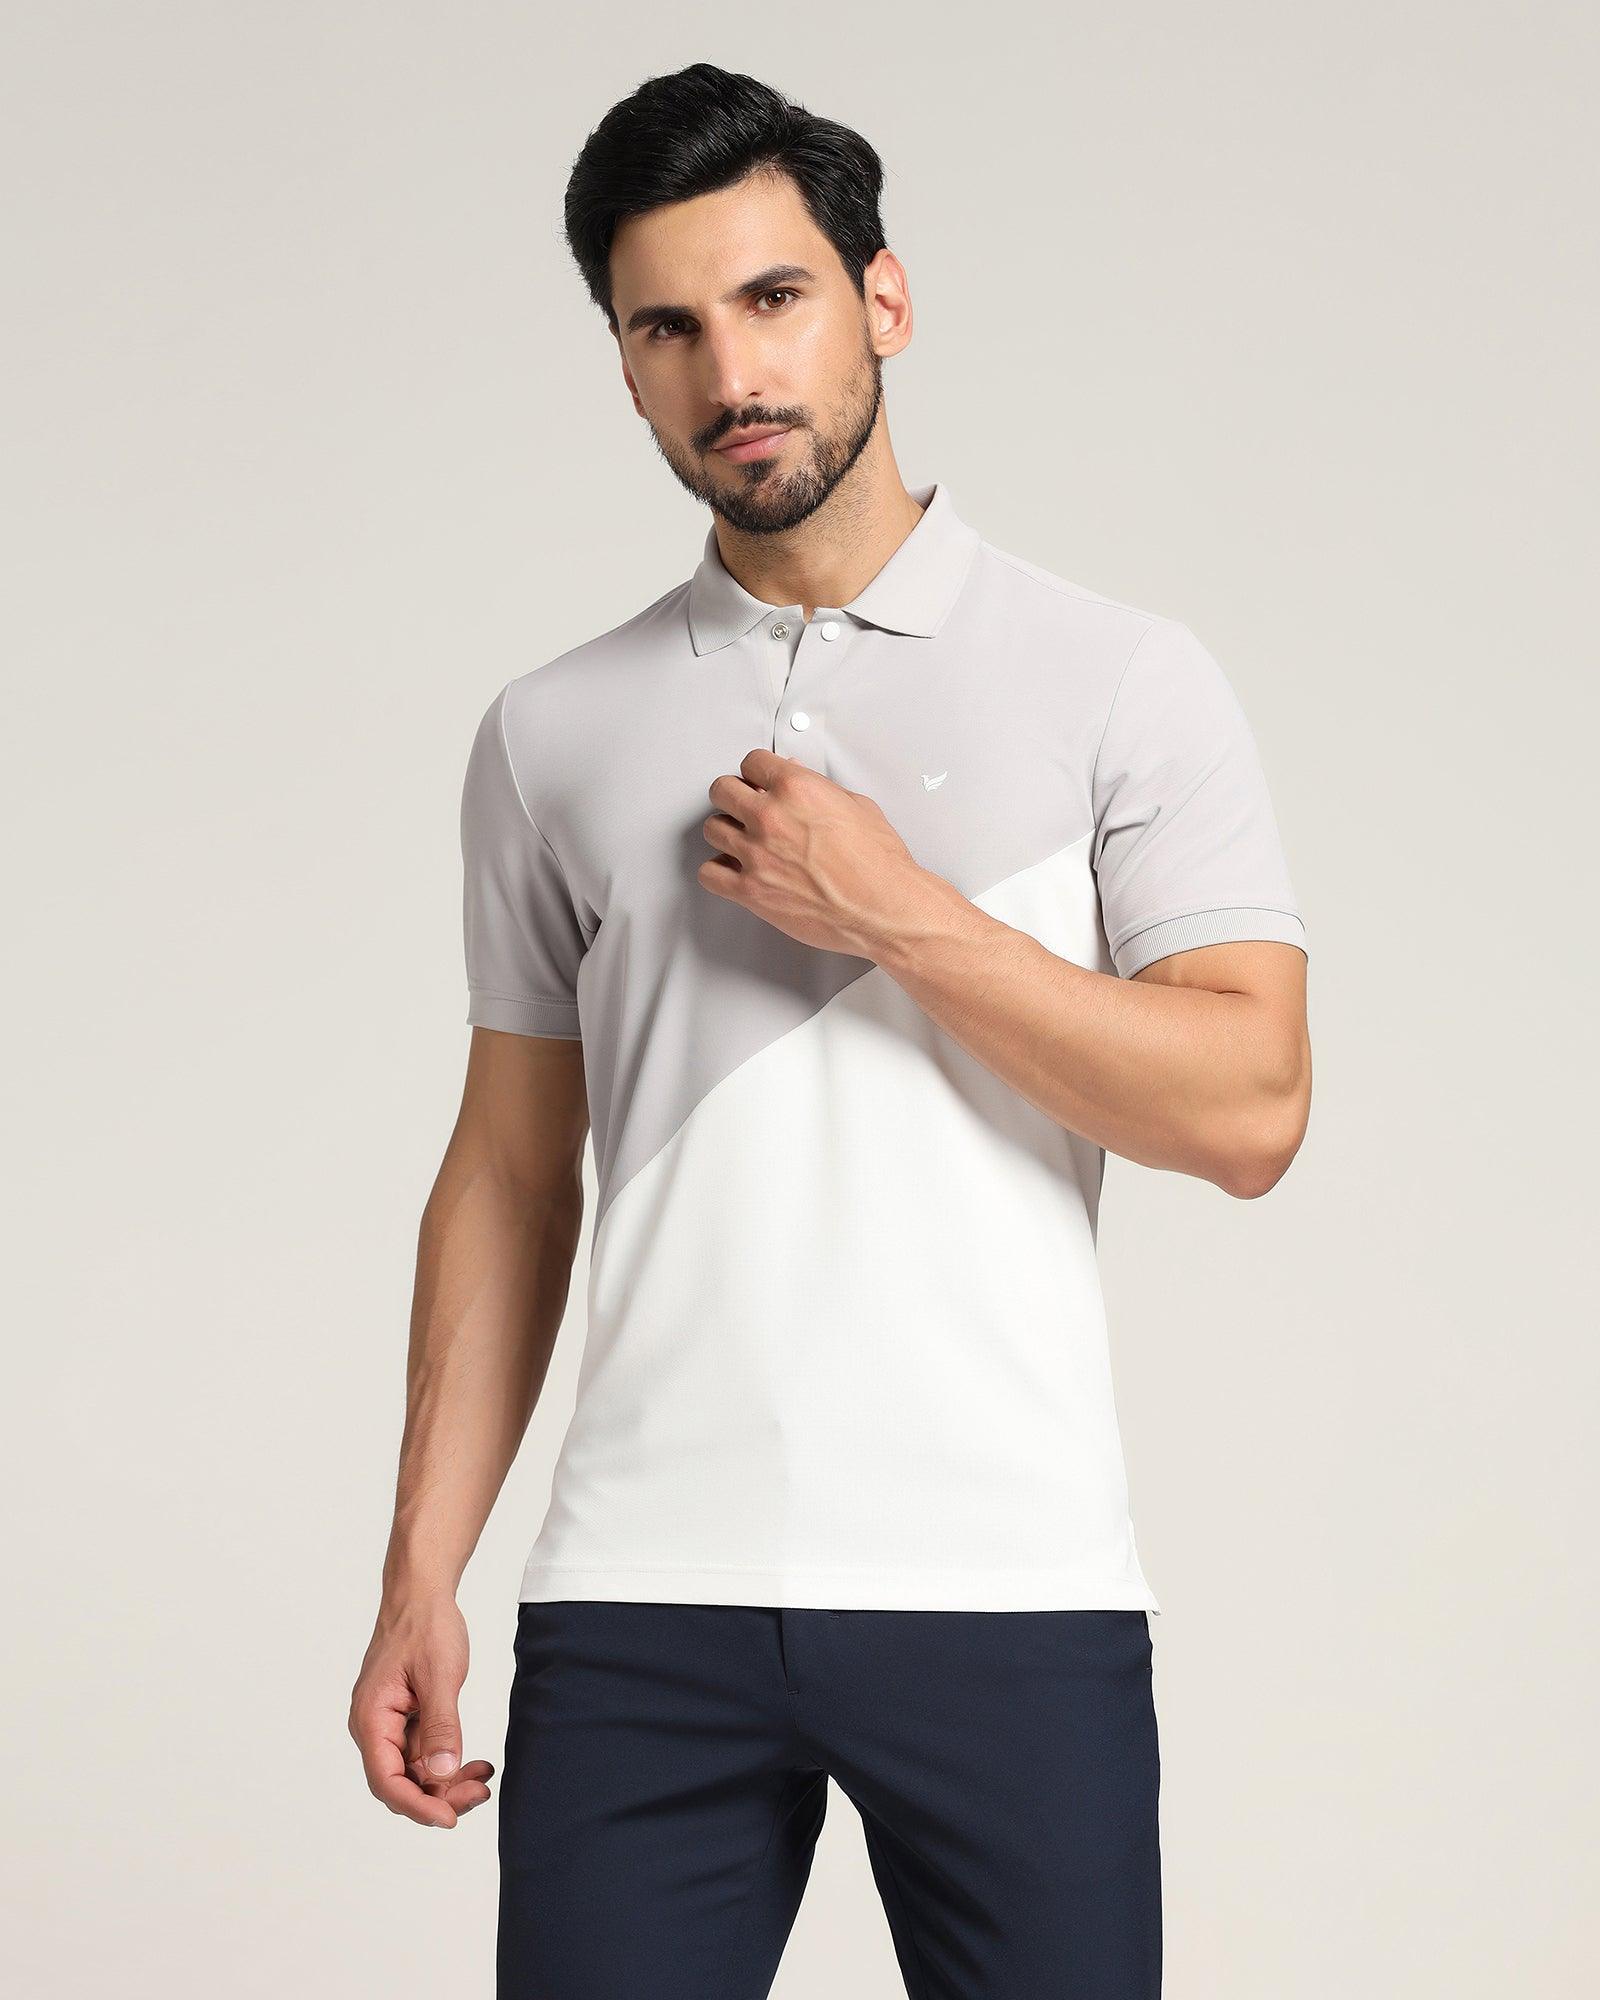 TechPro Polo Grey Solid T Shirt - Golf